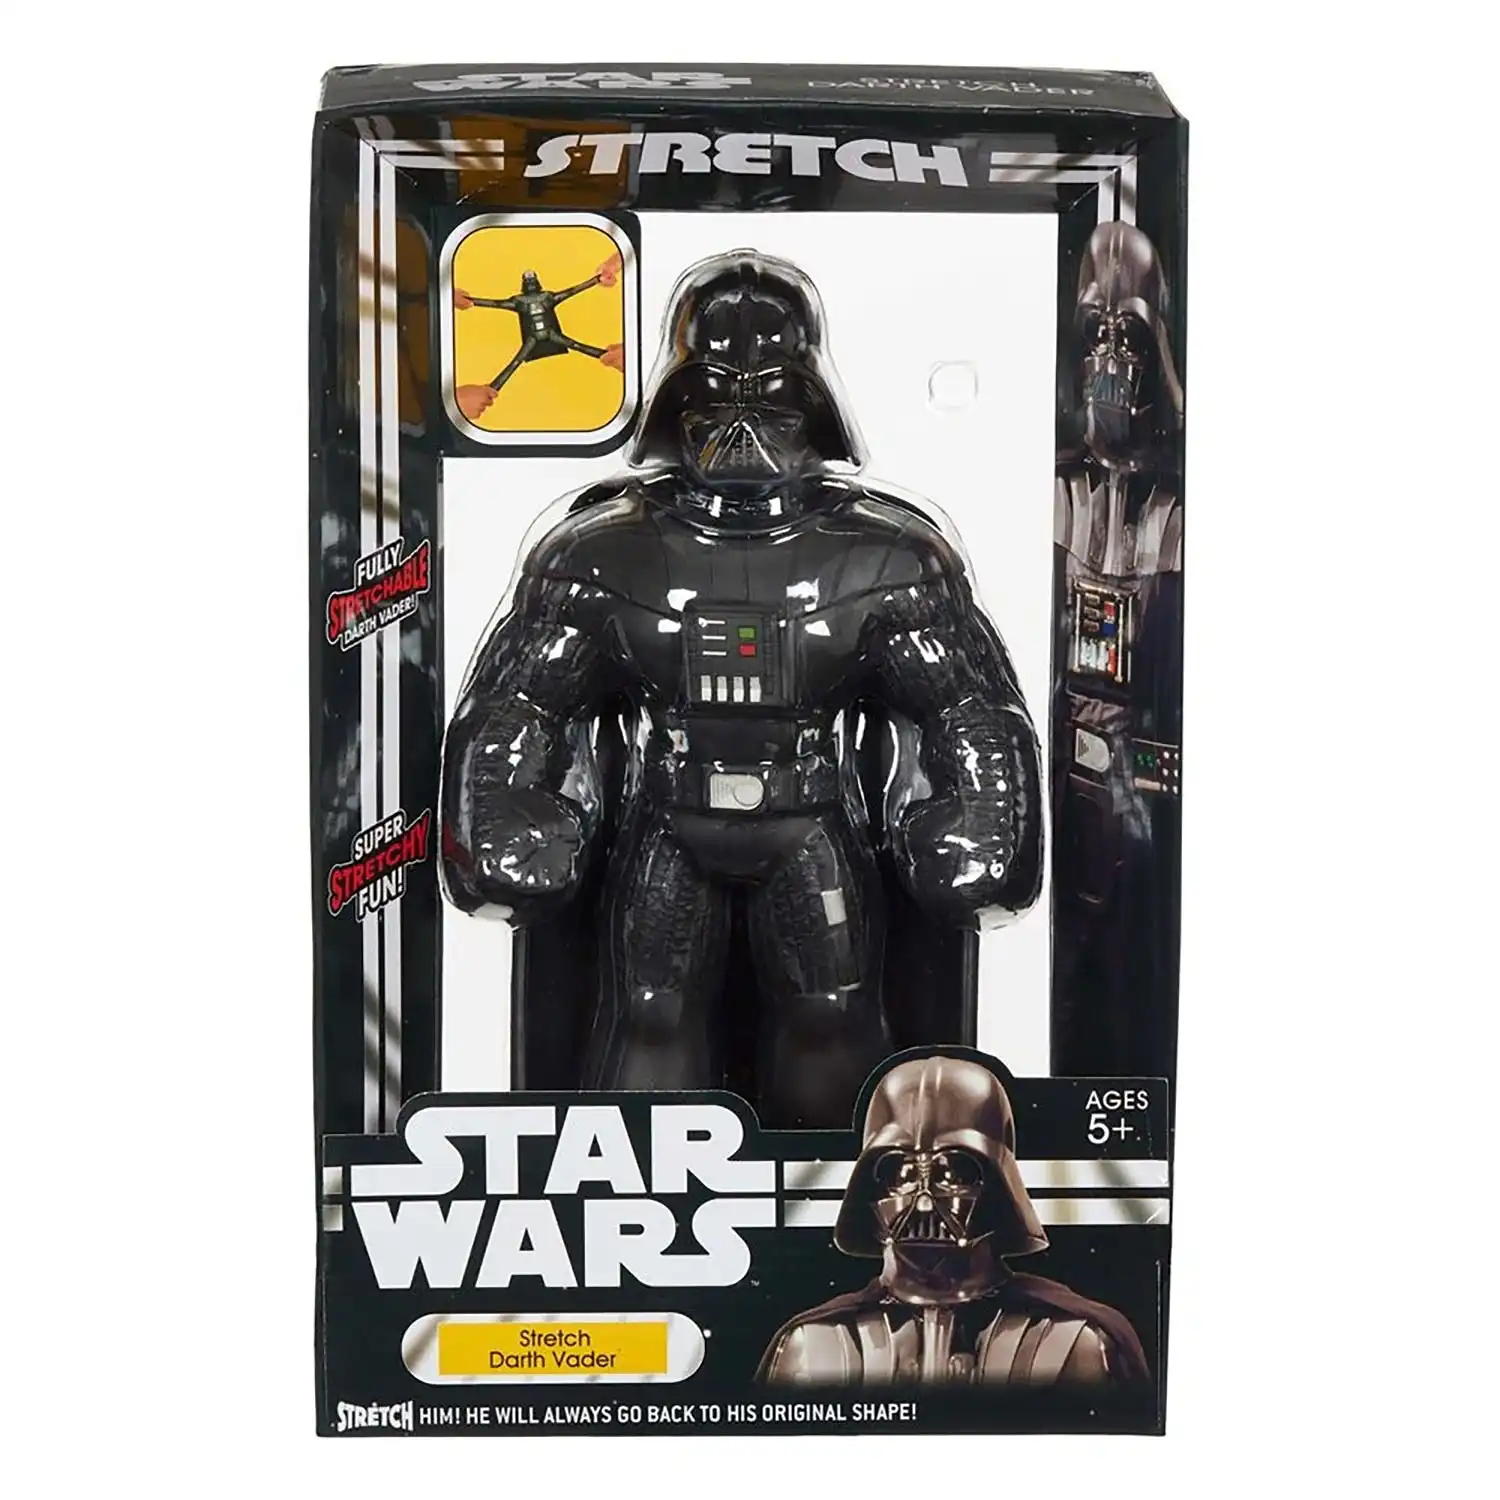 Mini Stretch Armstrong - Darth Vader